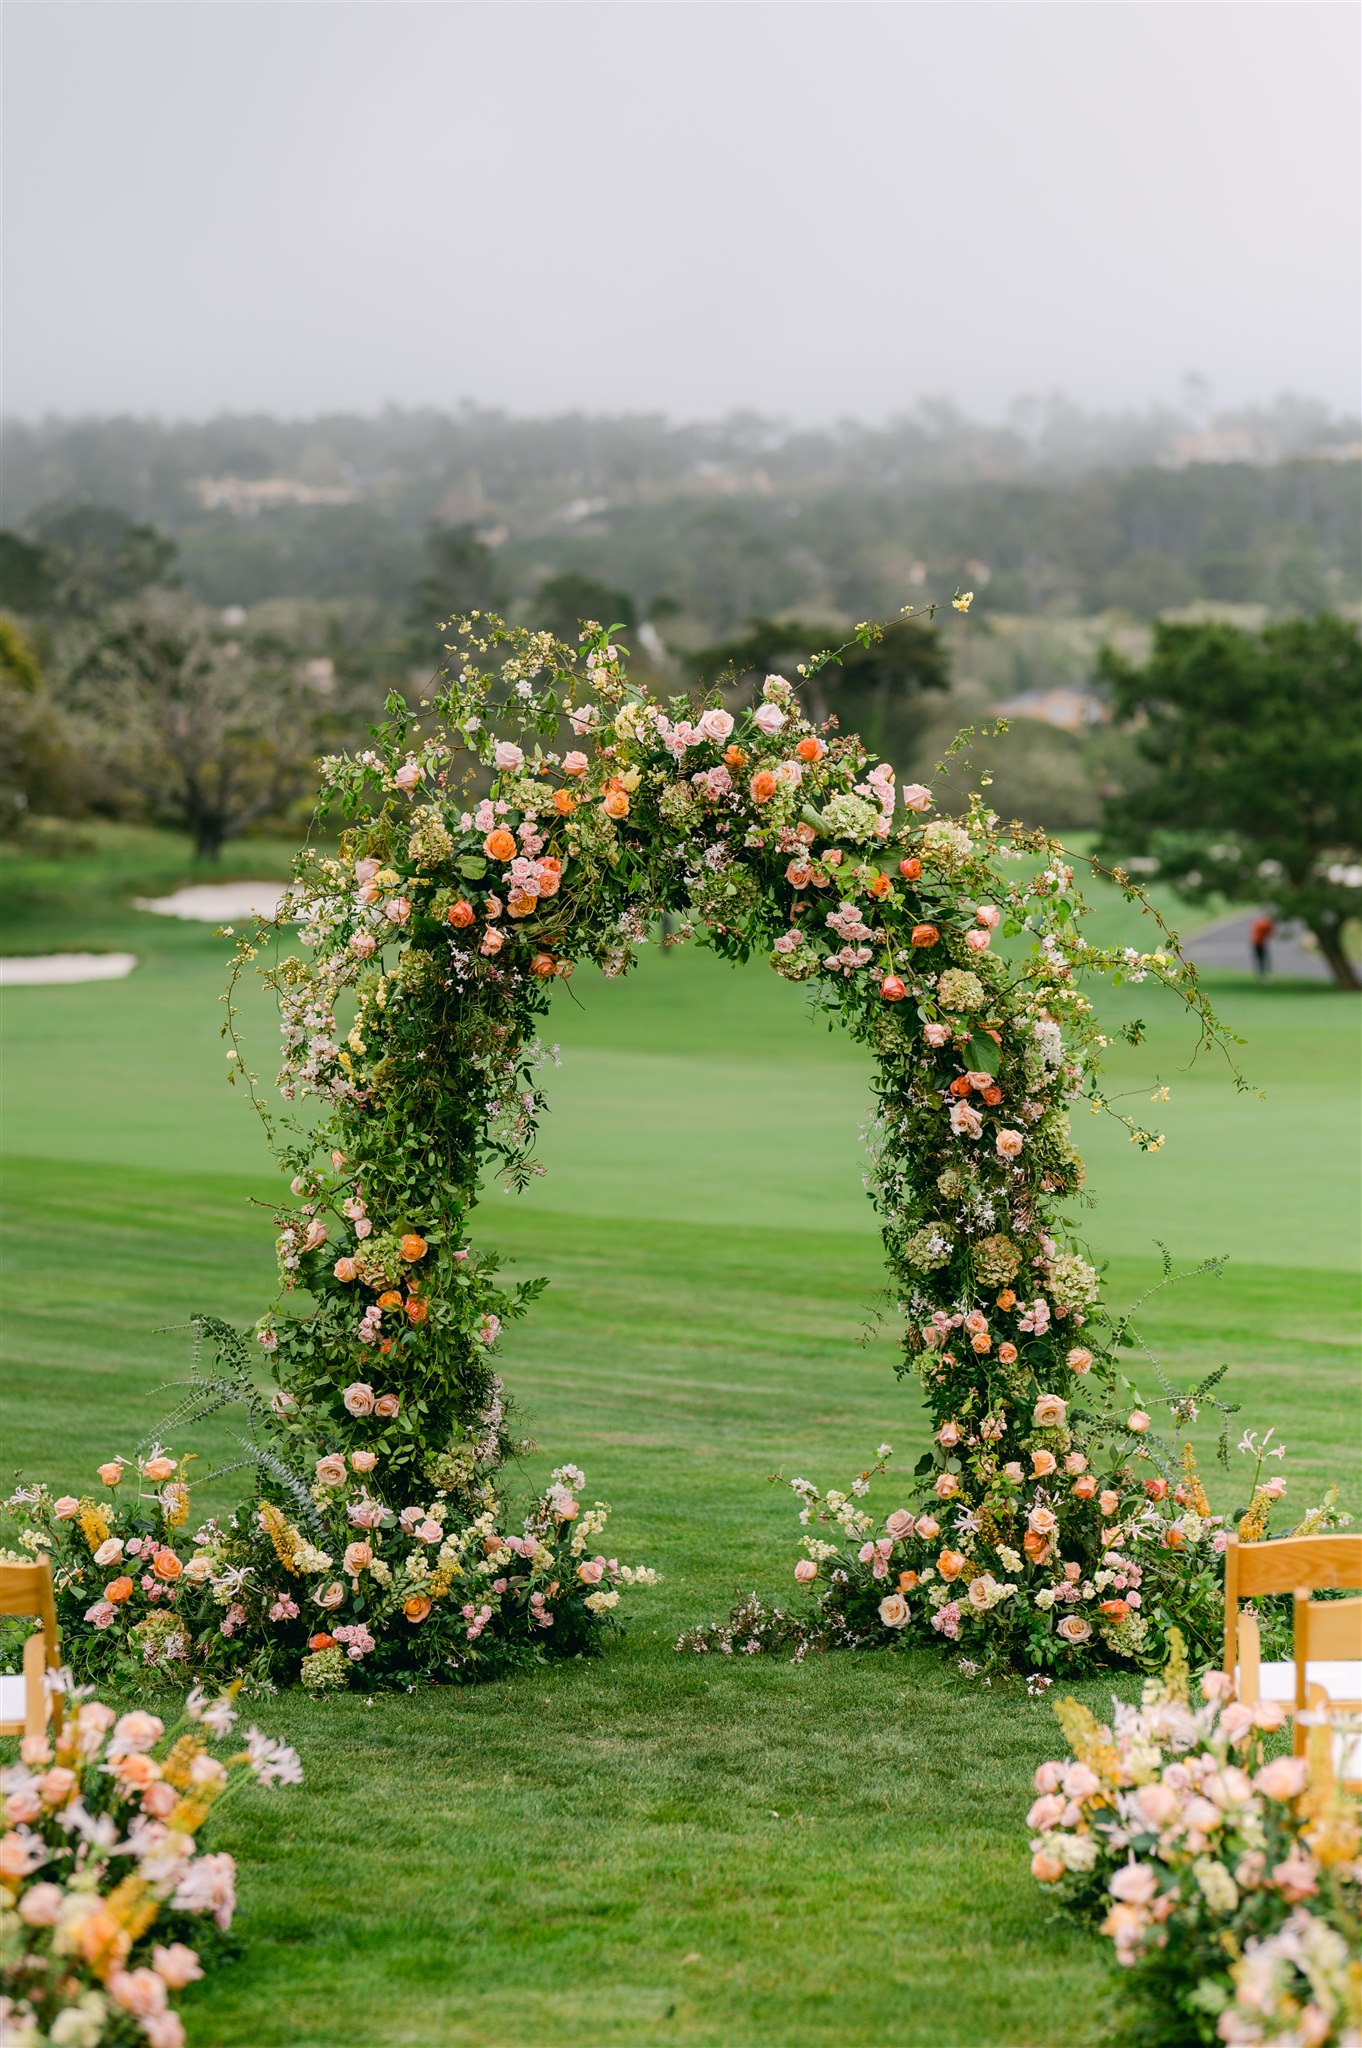 garden inspired wedding alter oranges pinks corals greens and white delicate florals carmel california wedding wooden chairs with white cushions